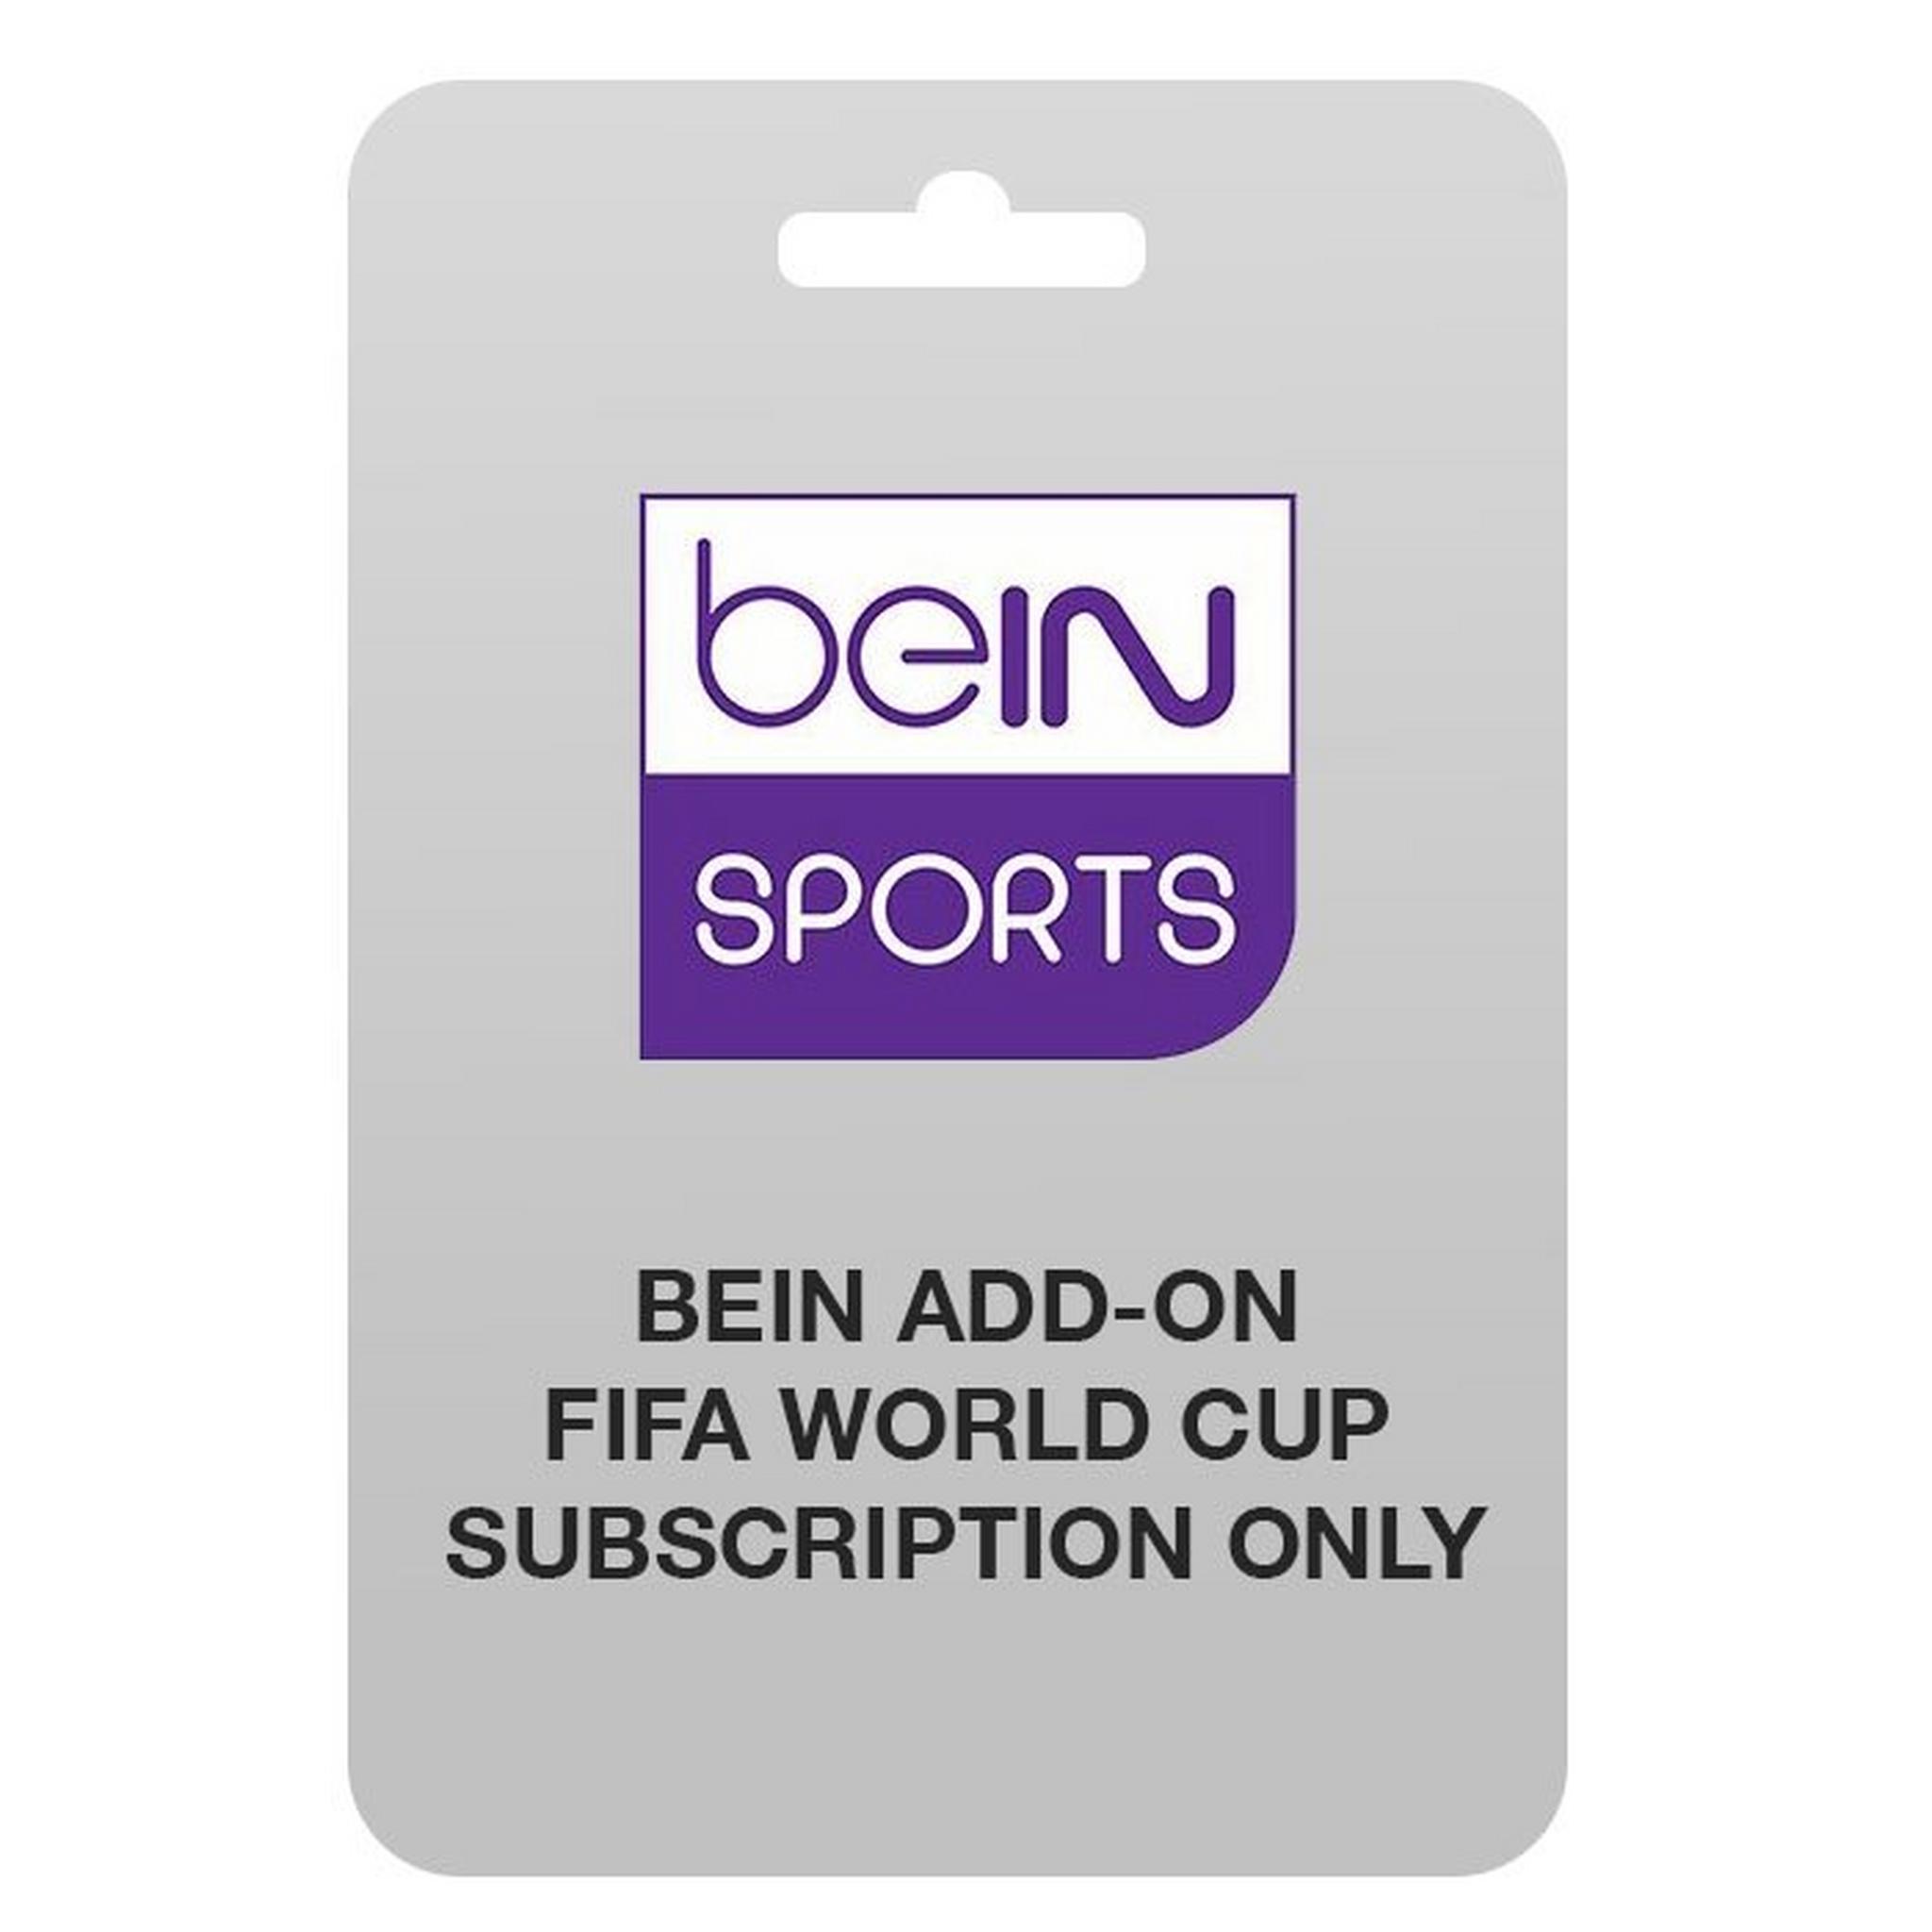 BEIN ADD ON FIFA WORLD CUP SUBSCRIPTION ONLY